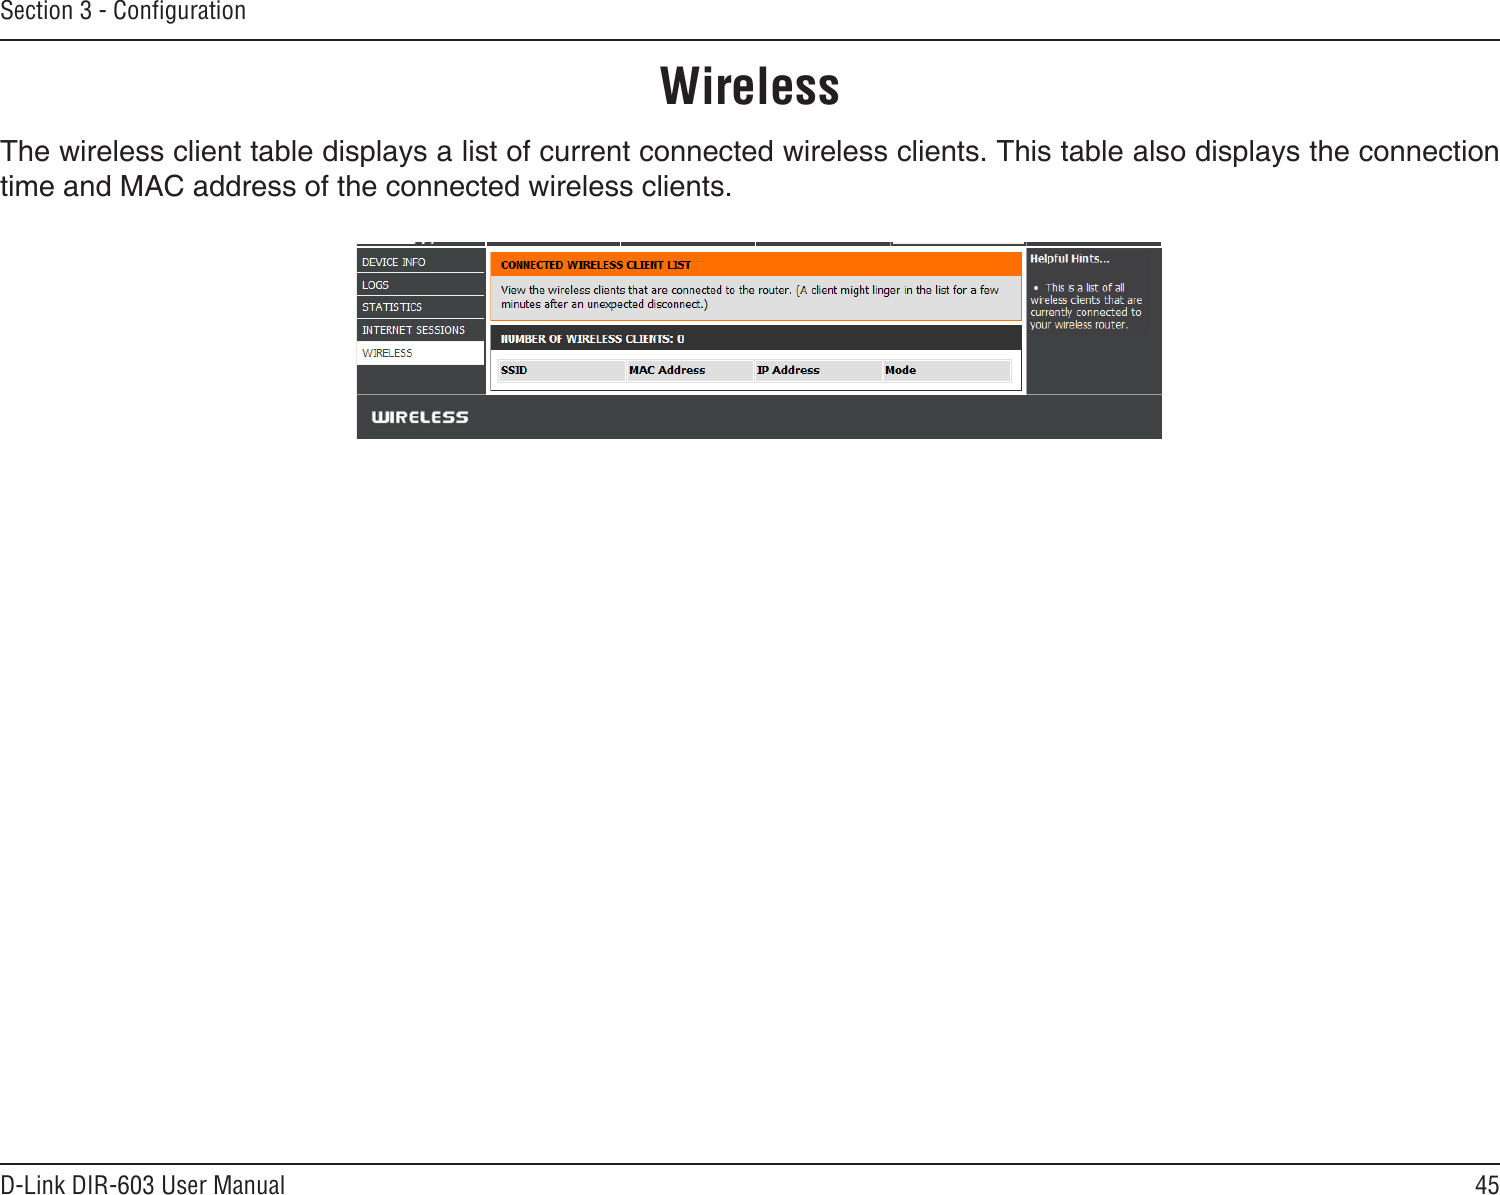 45D-Link DIR-603 User ManualSection 3 - CongurationThe wireless client table displays a list of current connected wireless clients. This table also displays the connection time and MAC address of the connected wireless clients.Wireless